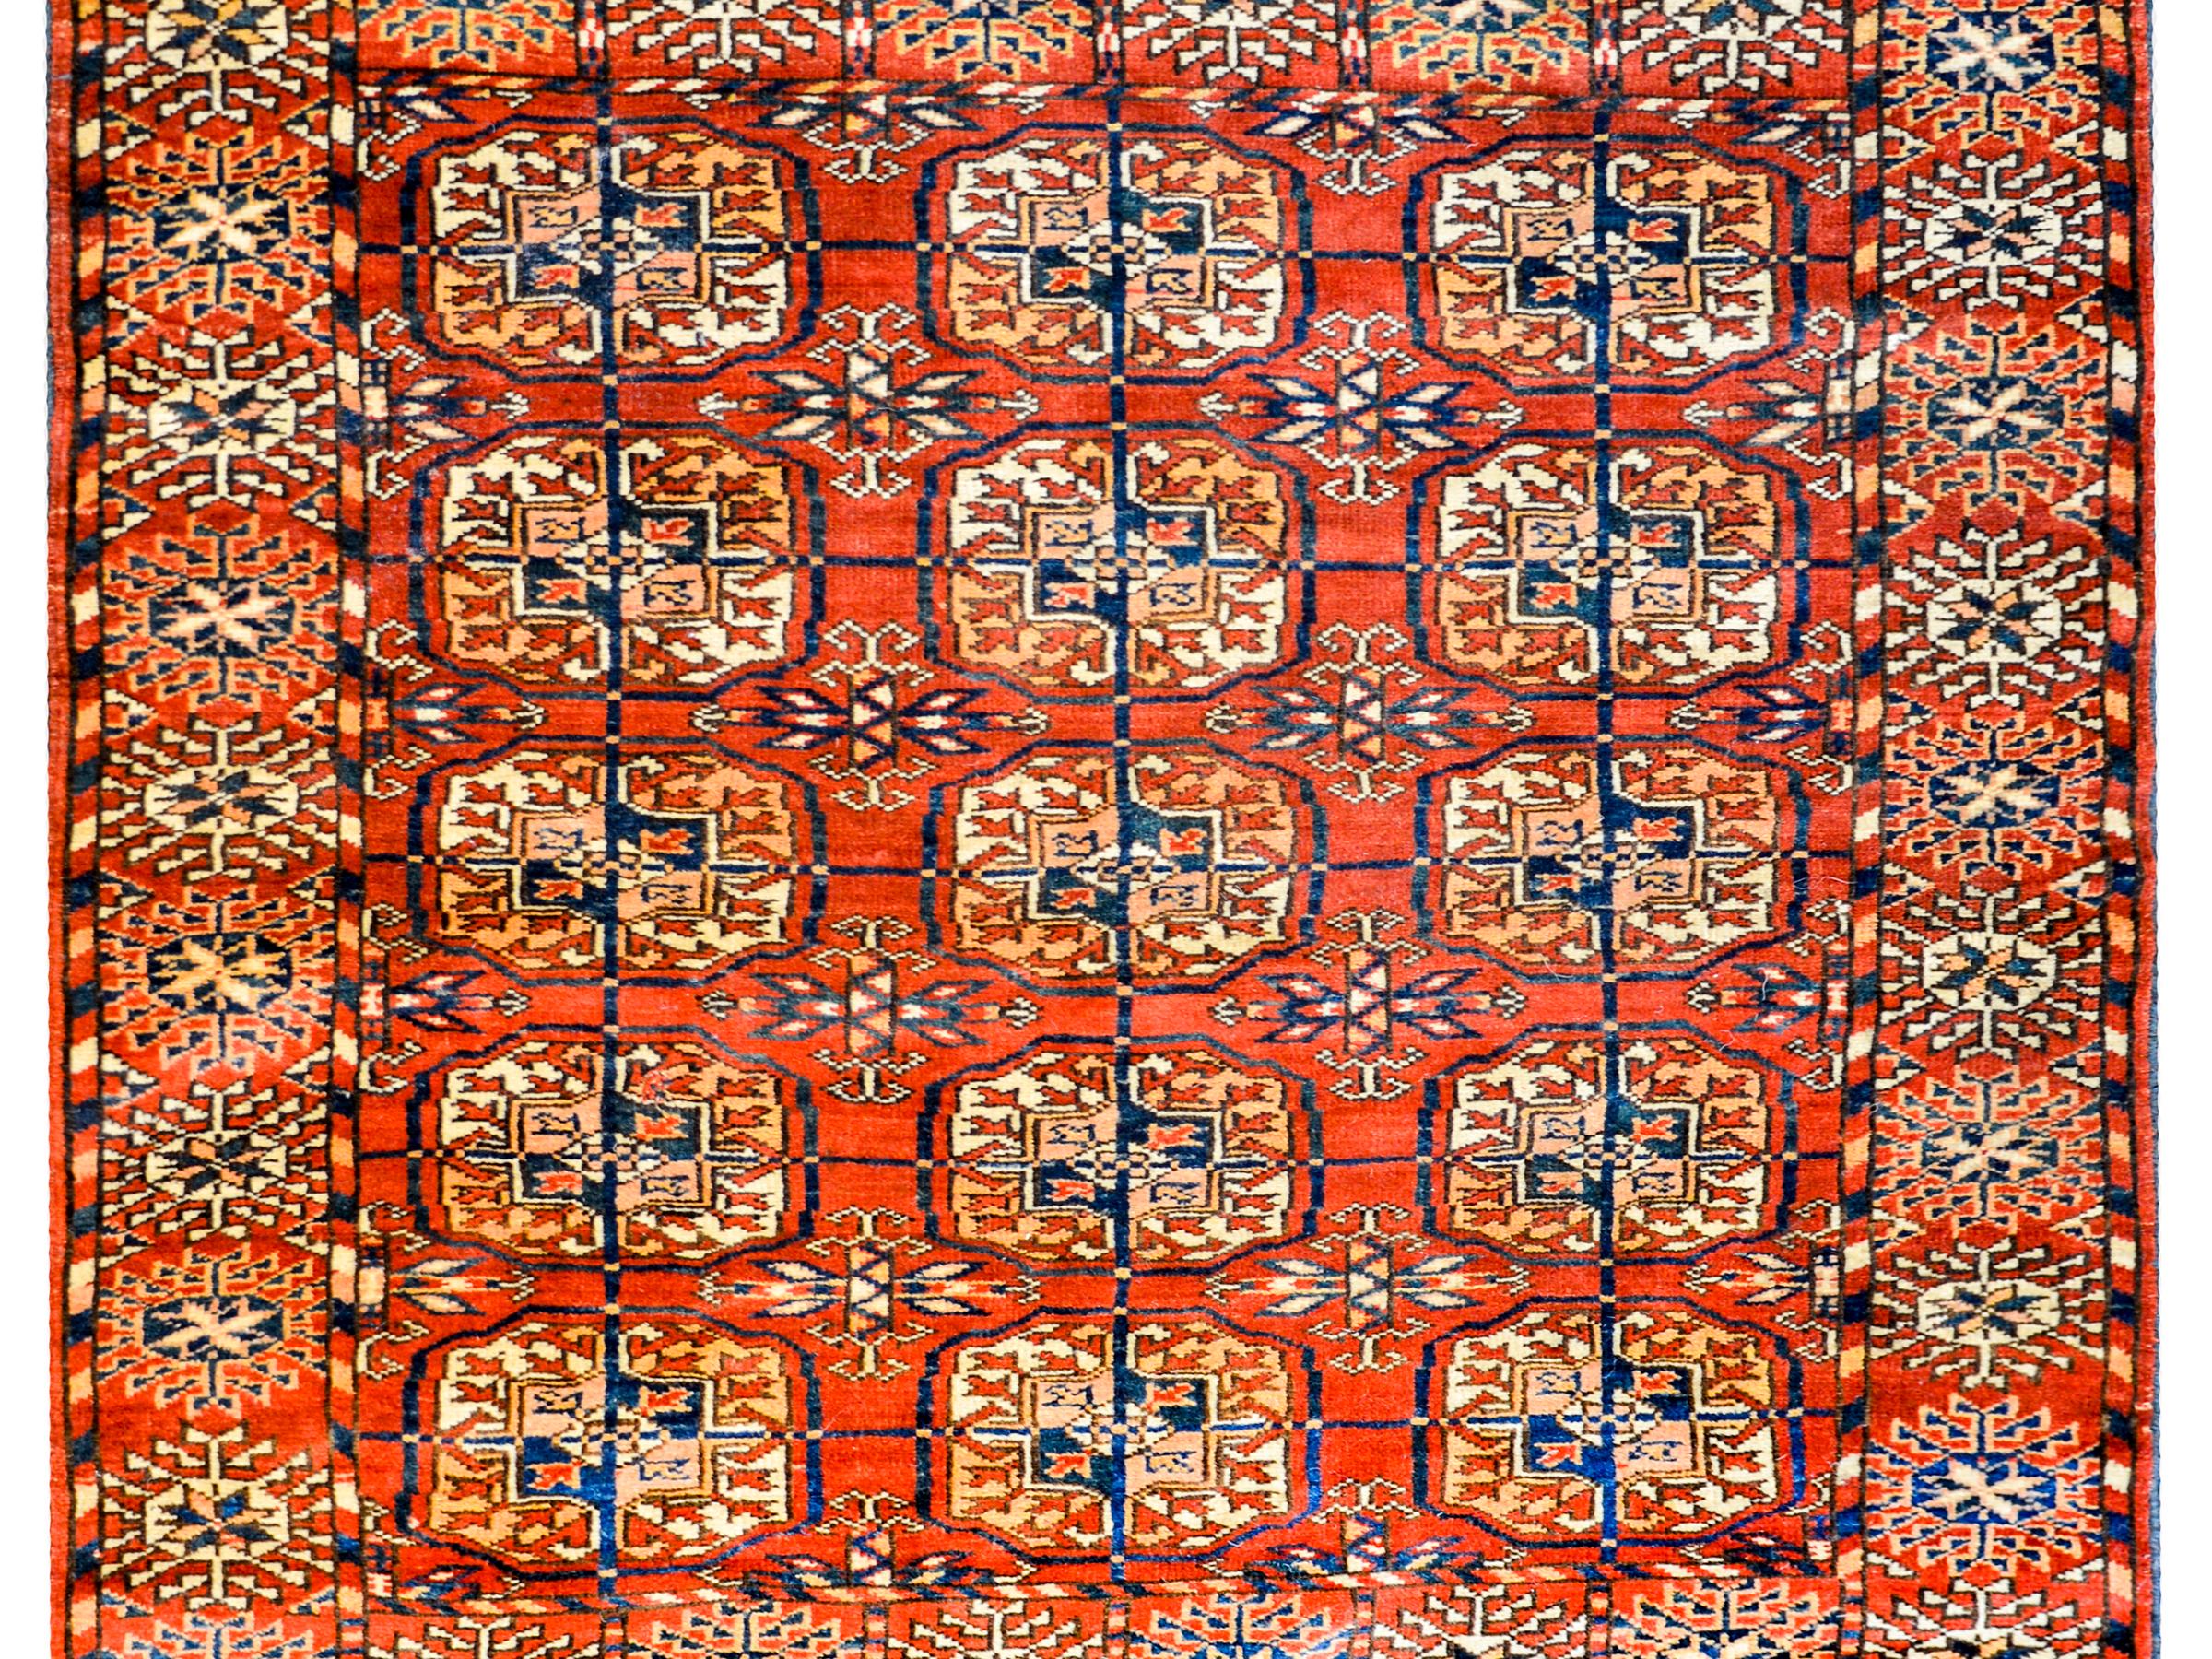 A wonderful early 20th century Persian Tekeh rug with all-over medallions woven in crimson, indigo, white and cream colored wool, on a crimson background. The border is complex with a fantastic stylized floral pattern surrounding the field, with a